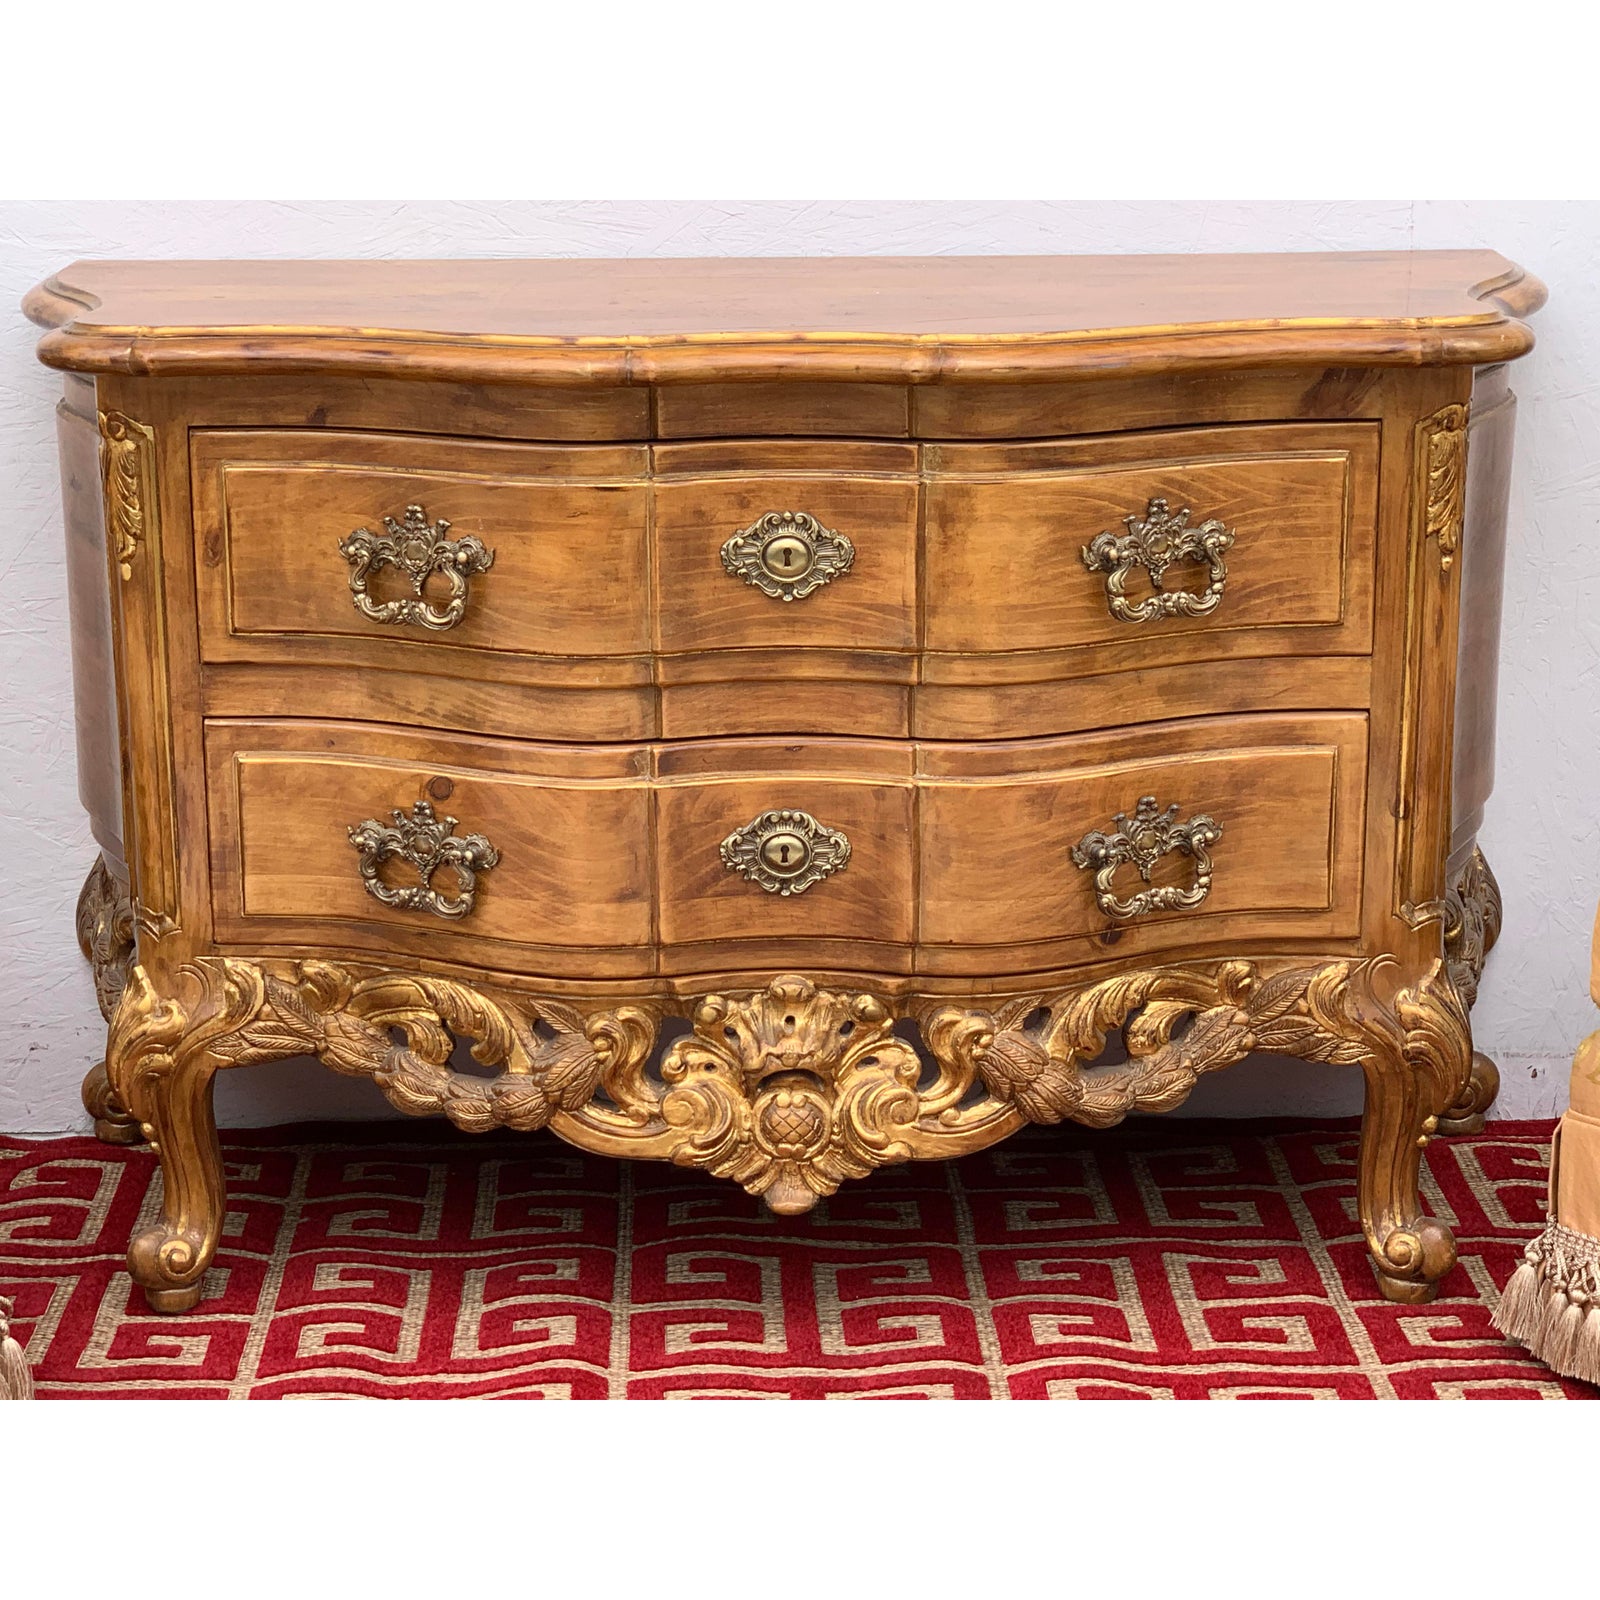 baltic-style-louis-xv-style-chest-of-drawers-5653